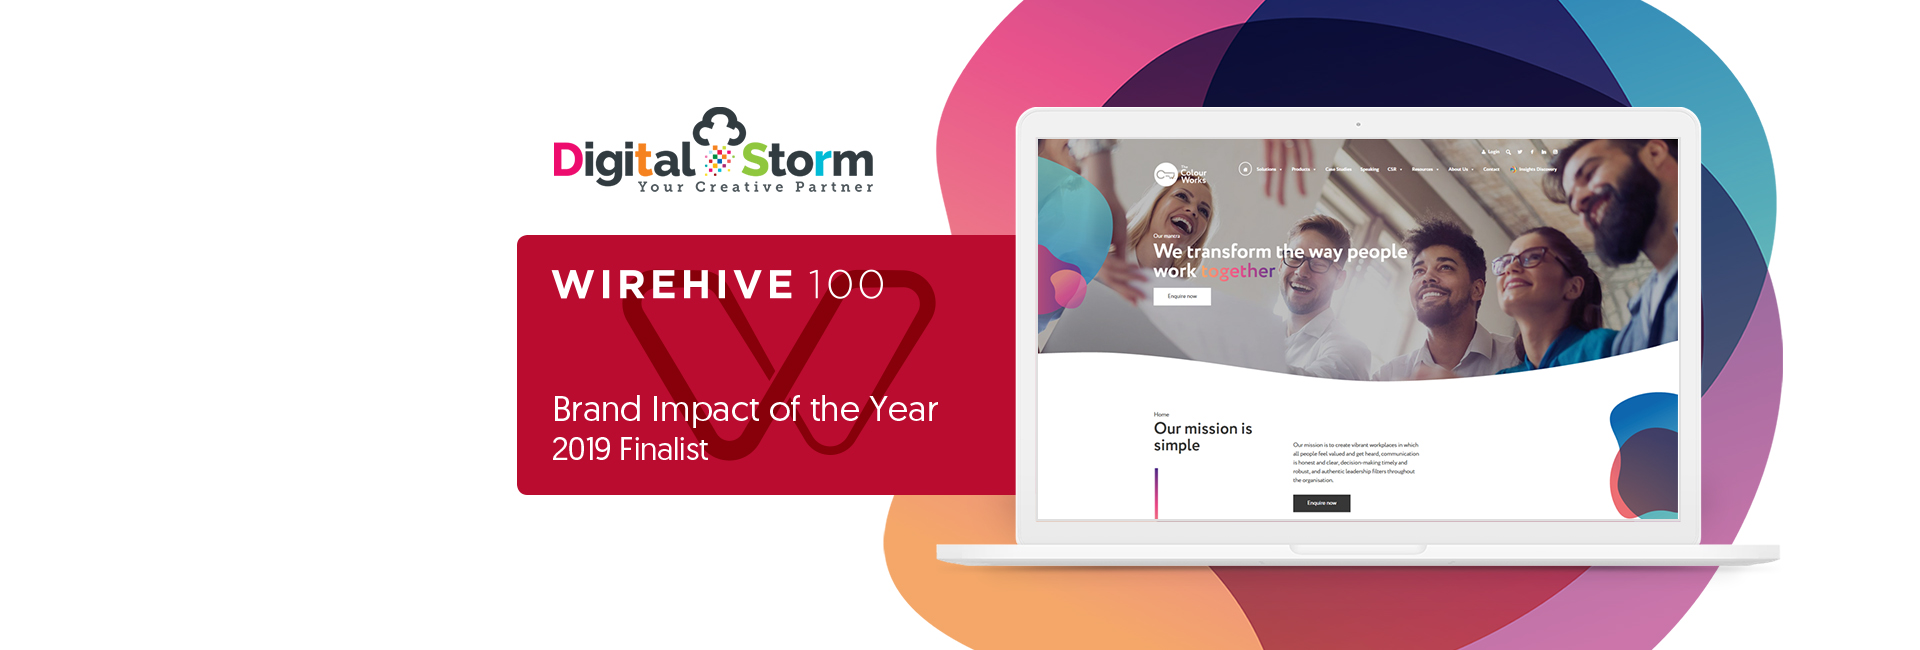 Digital Storm make finalists for Wirehive’s Brand Impact of the Year 2019